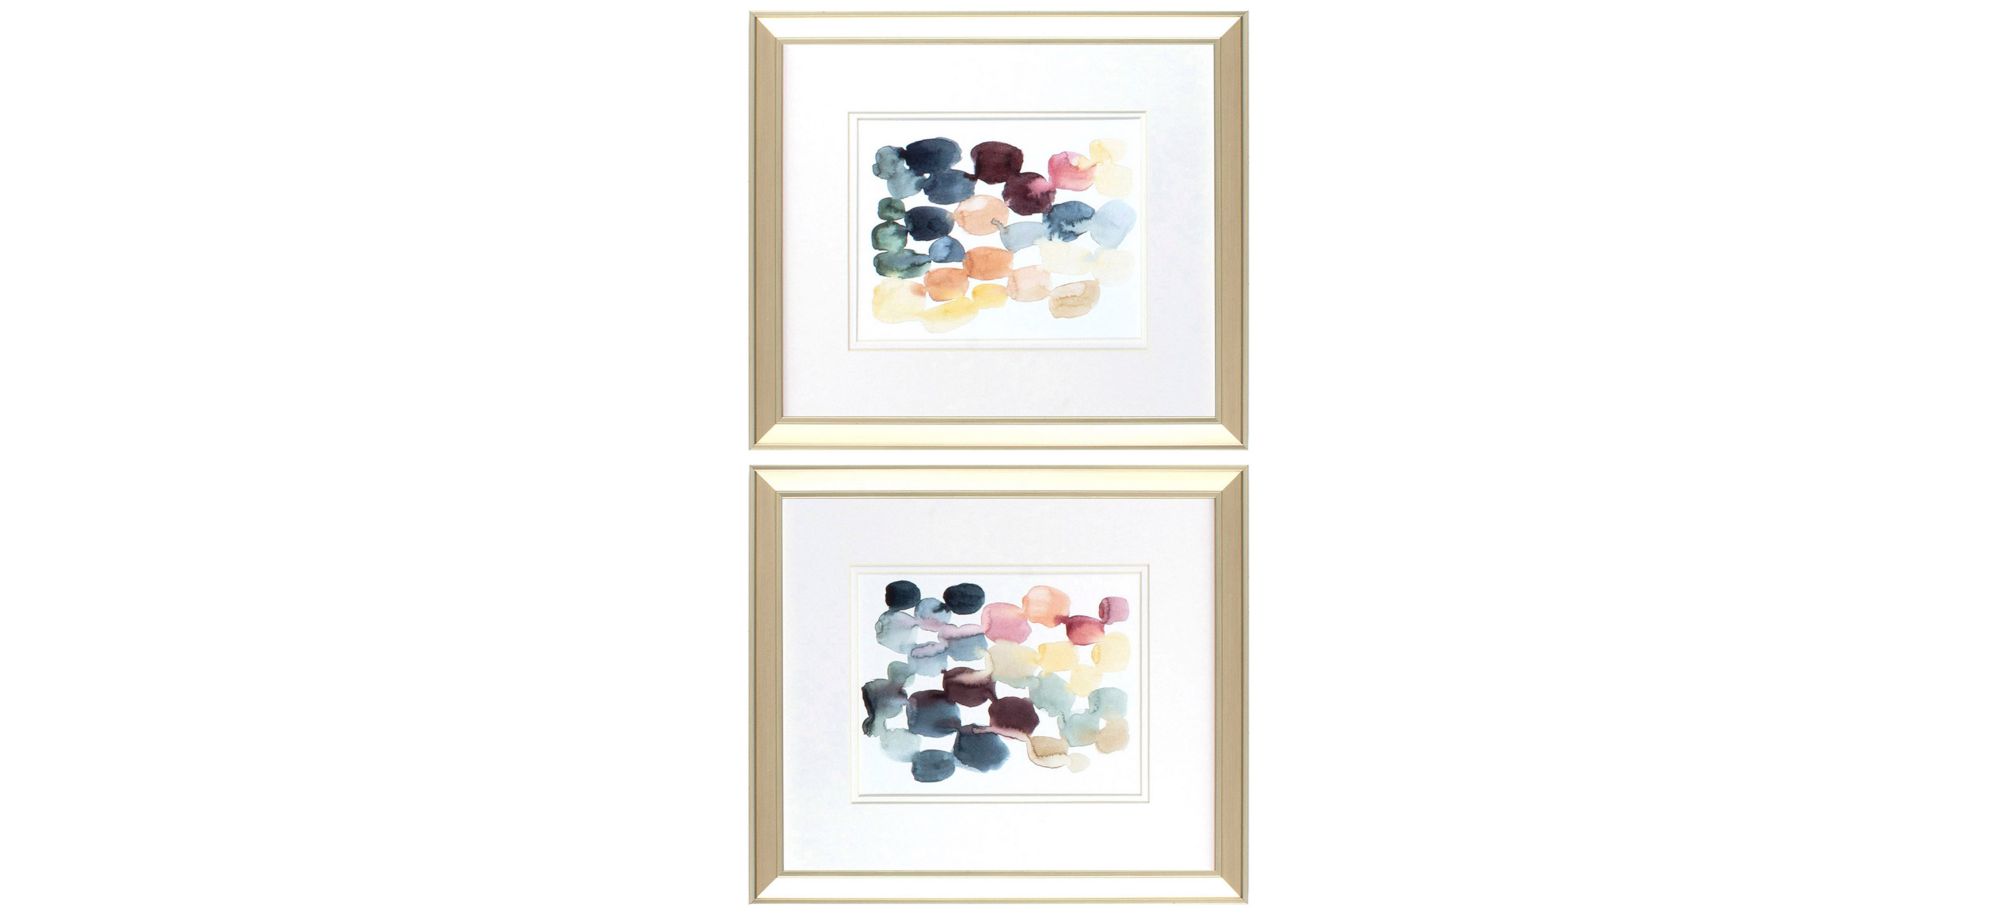 Desert Stones Wall Art S/2 in Multicolor, Blue, Green, Pink Yellow by Propac Images